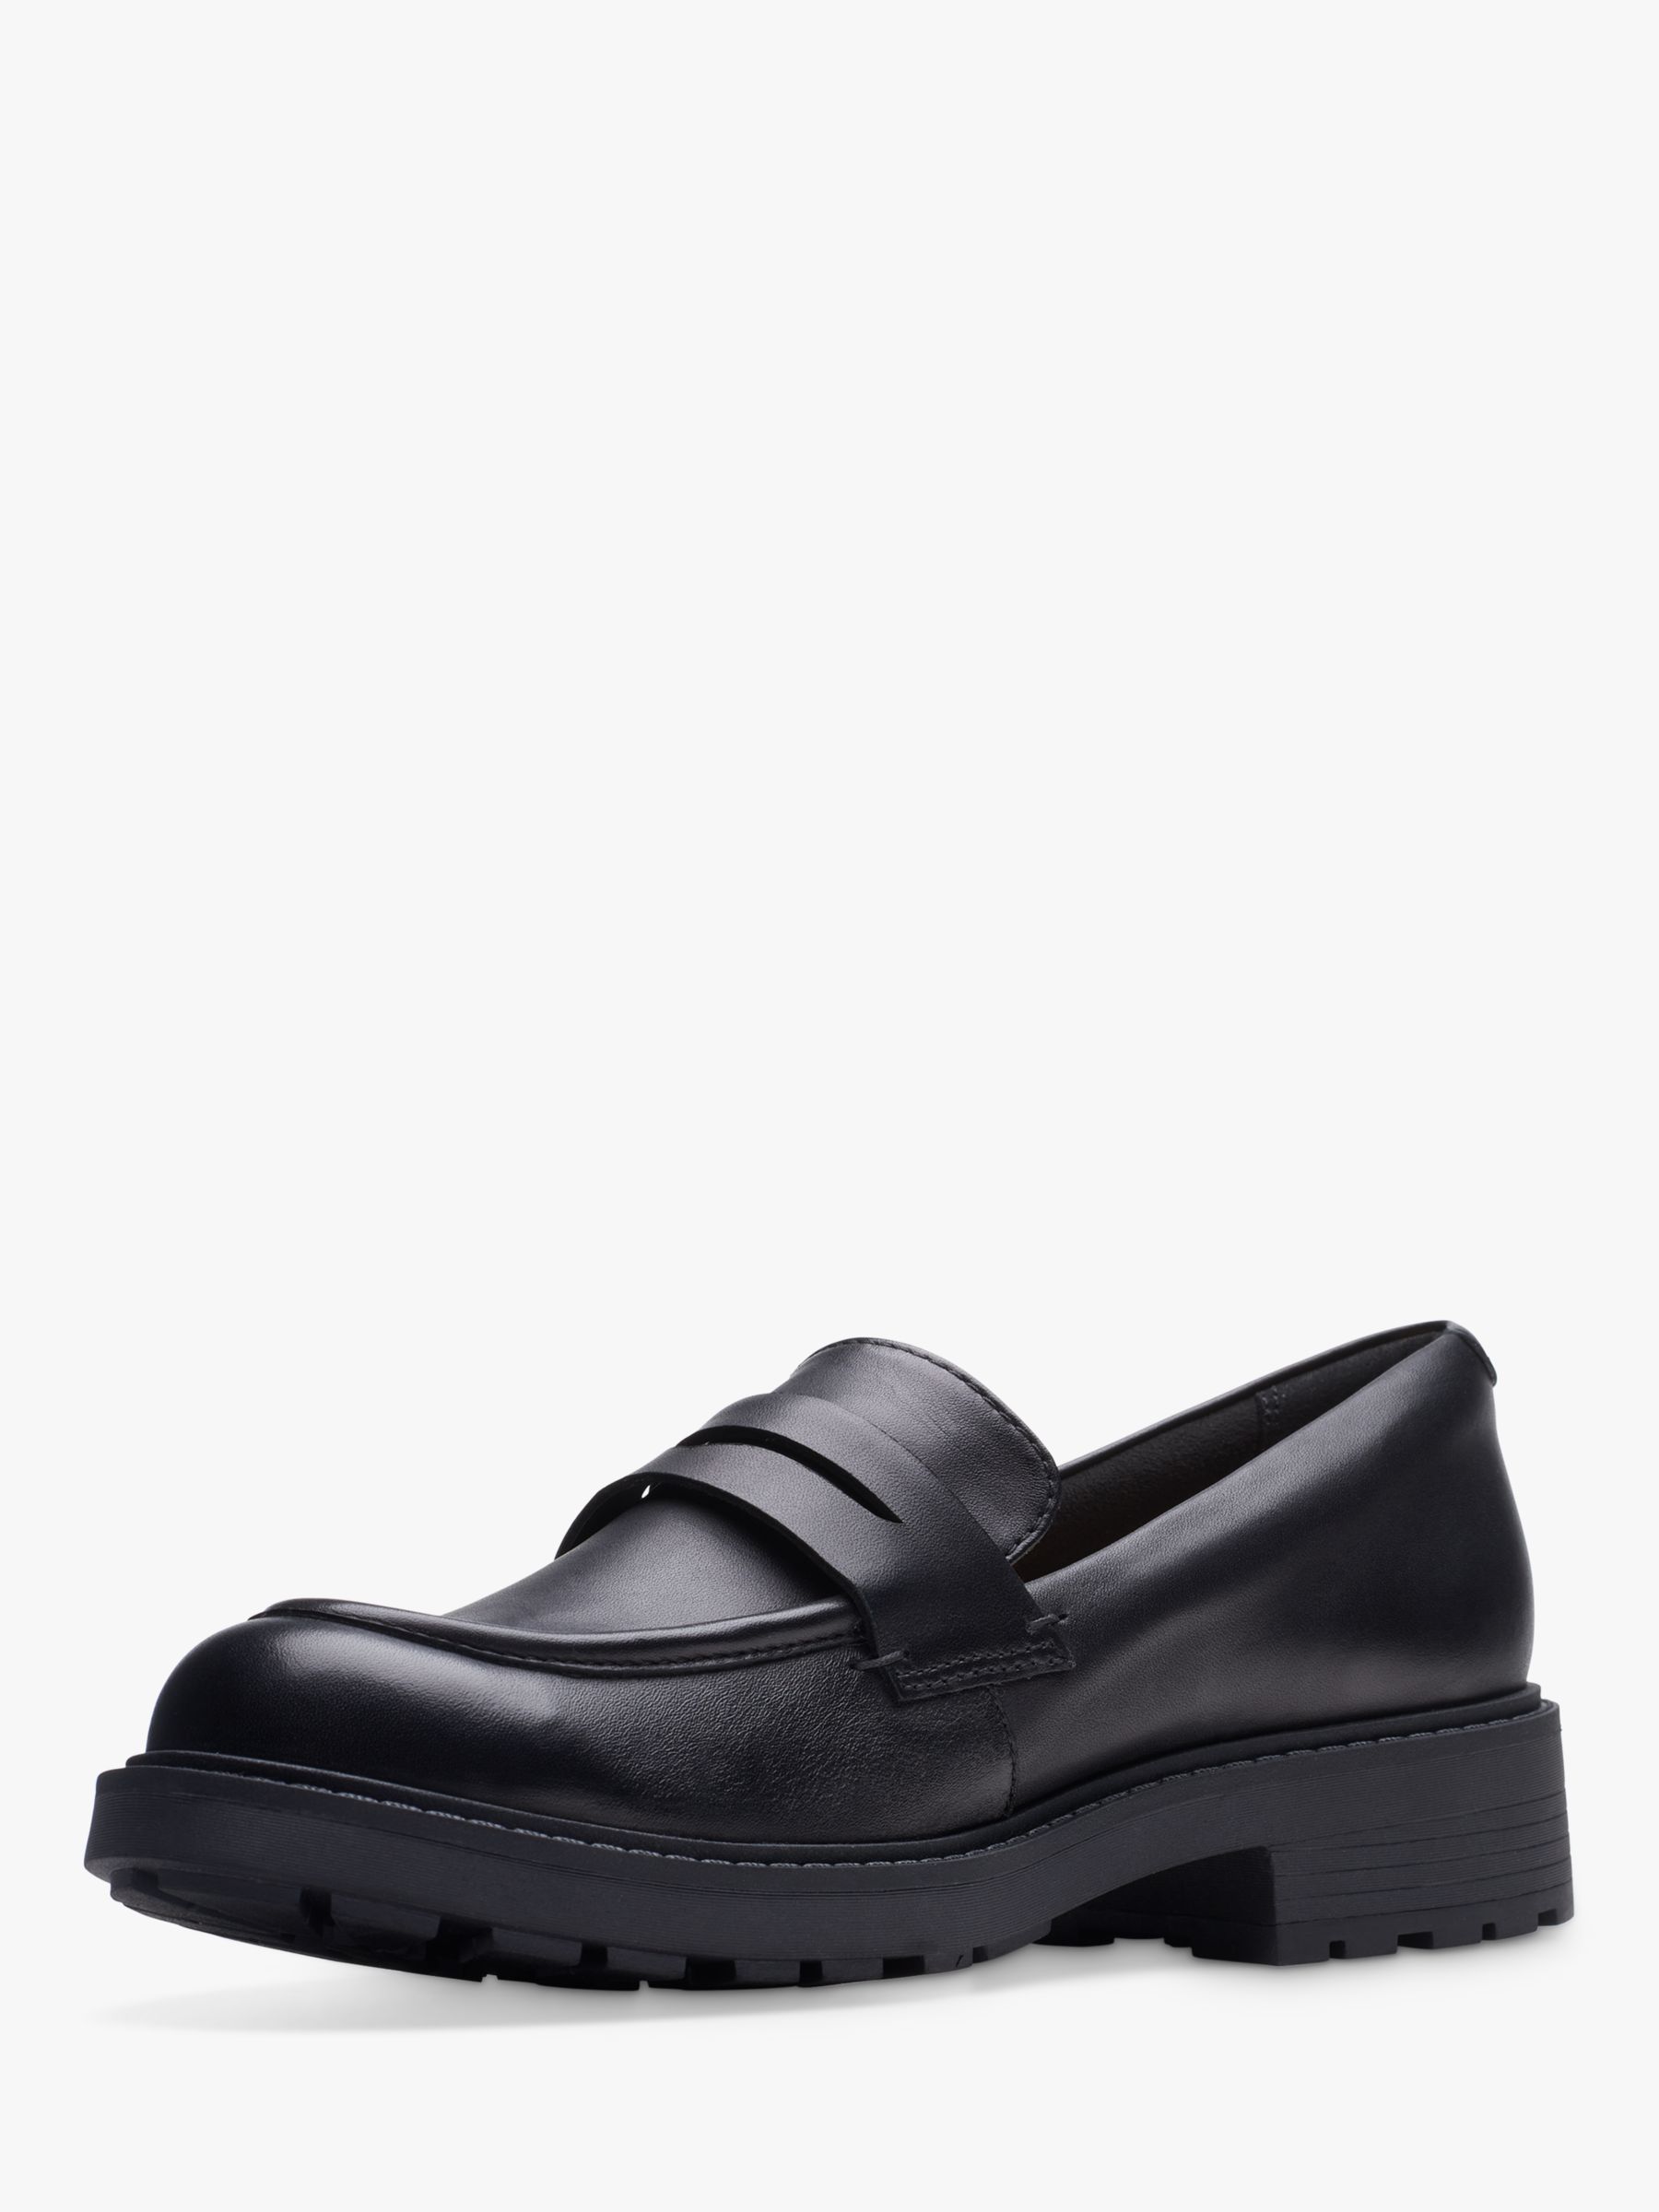 Clarks Orinoco 2 Penny Leather Loafers, Black, 6